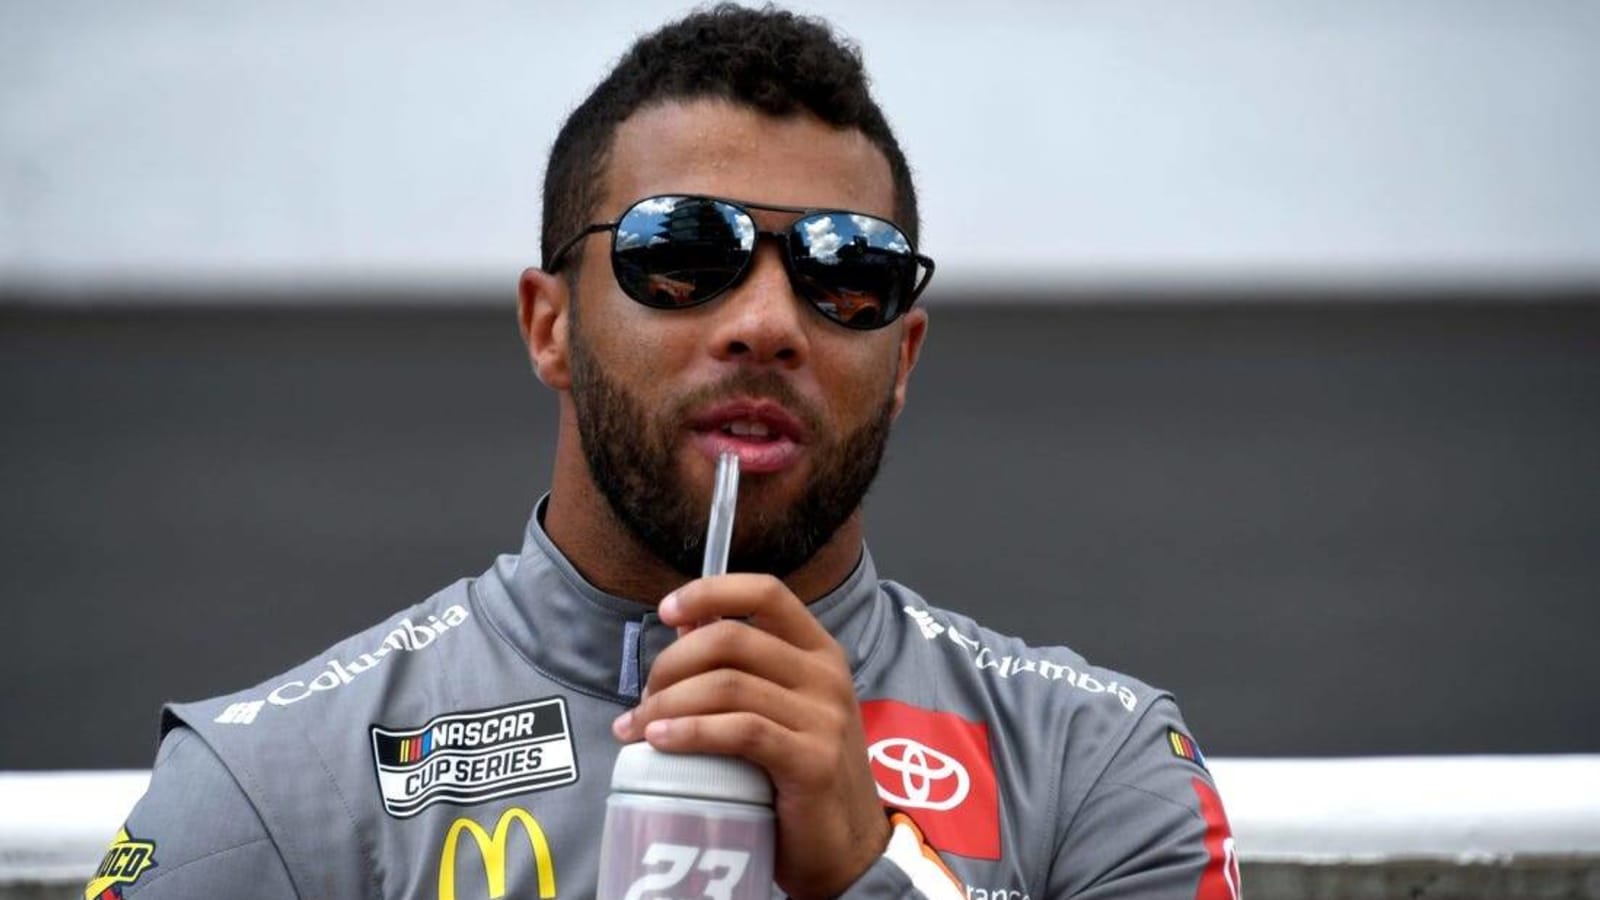 Bubba Wallace wins first career NASCAR Cup pole at Michigan